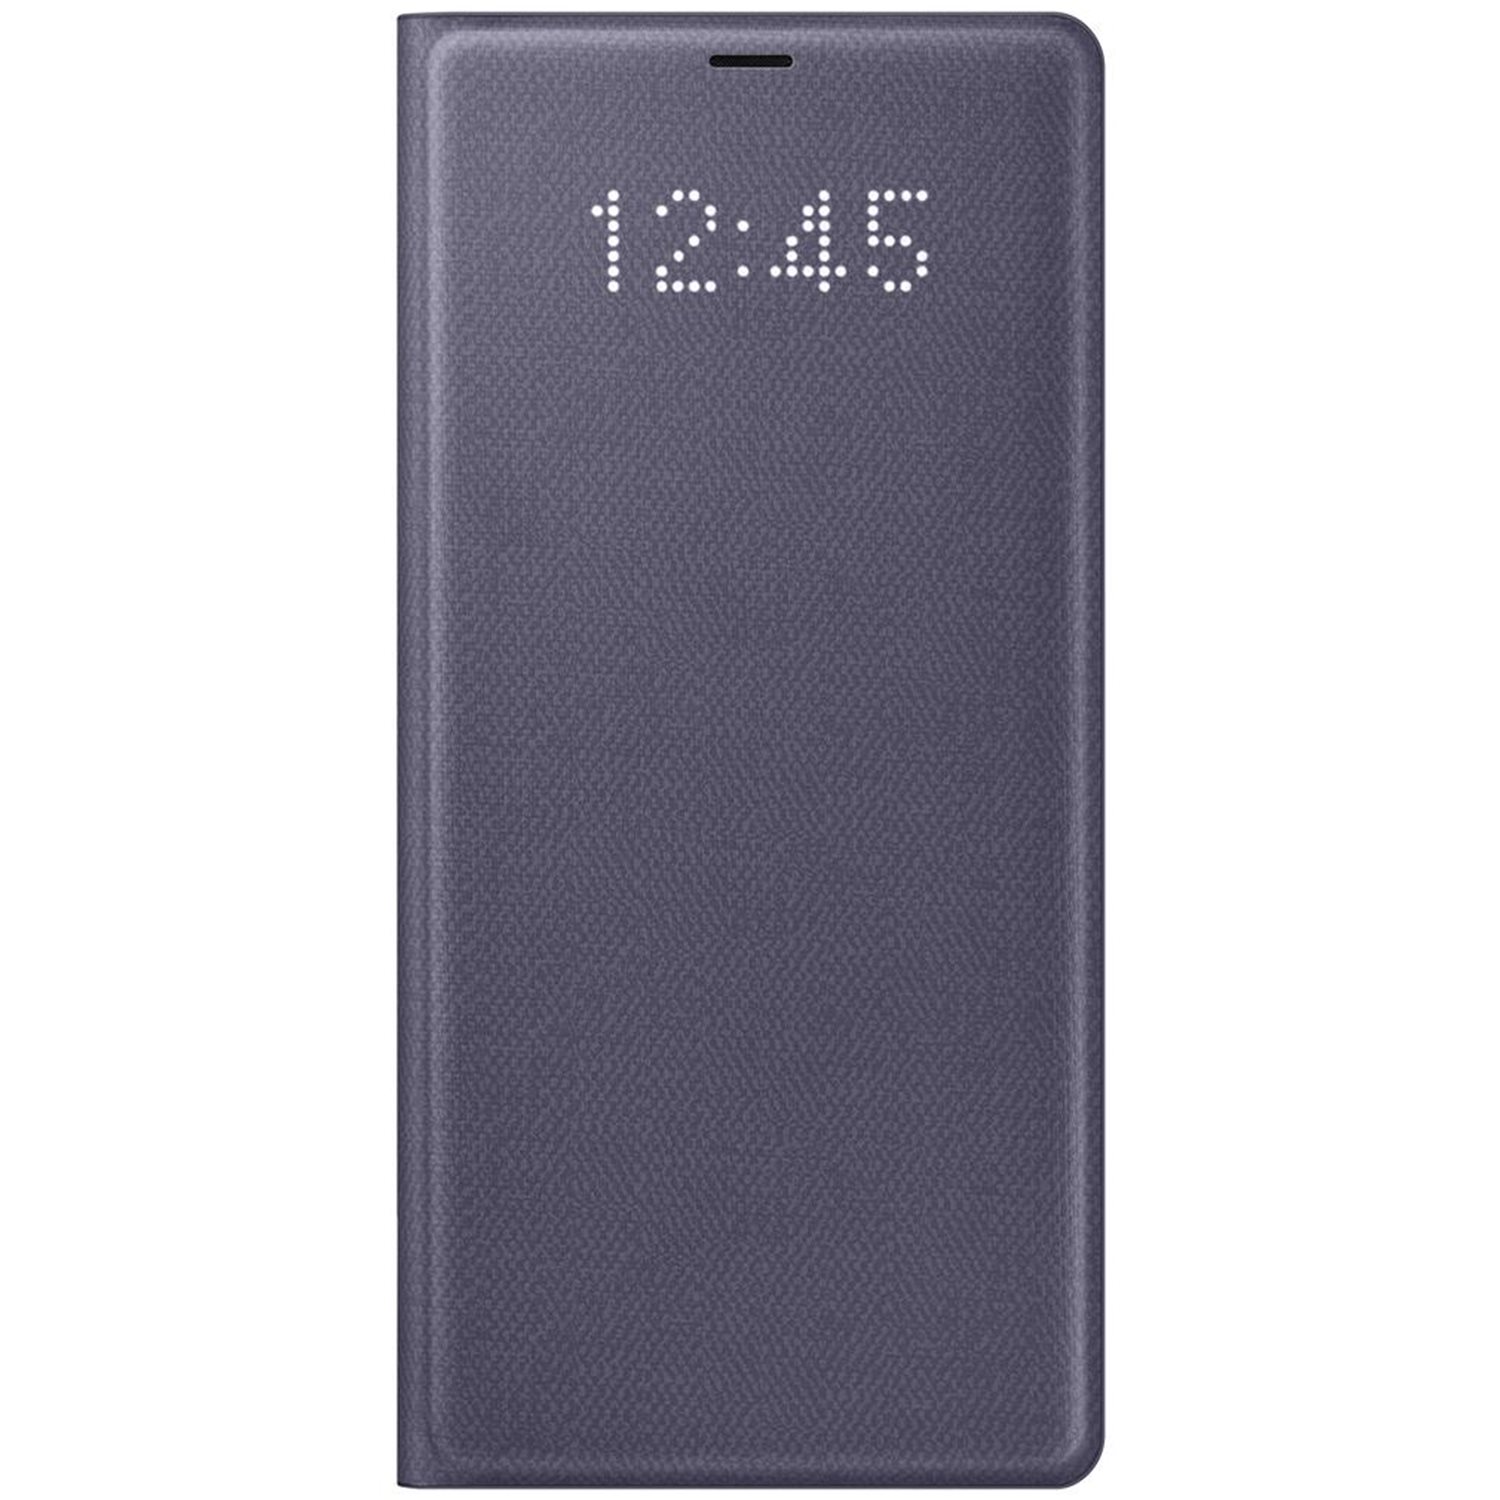 Official Samsung Galaxy Note LED View Cover - Orchid Grey